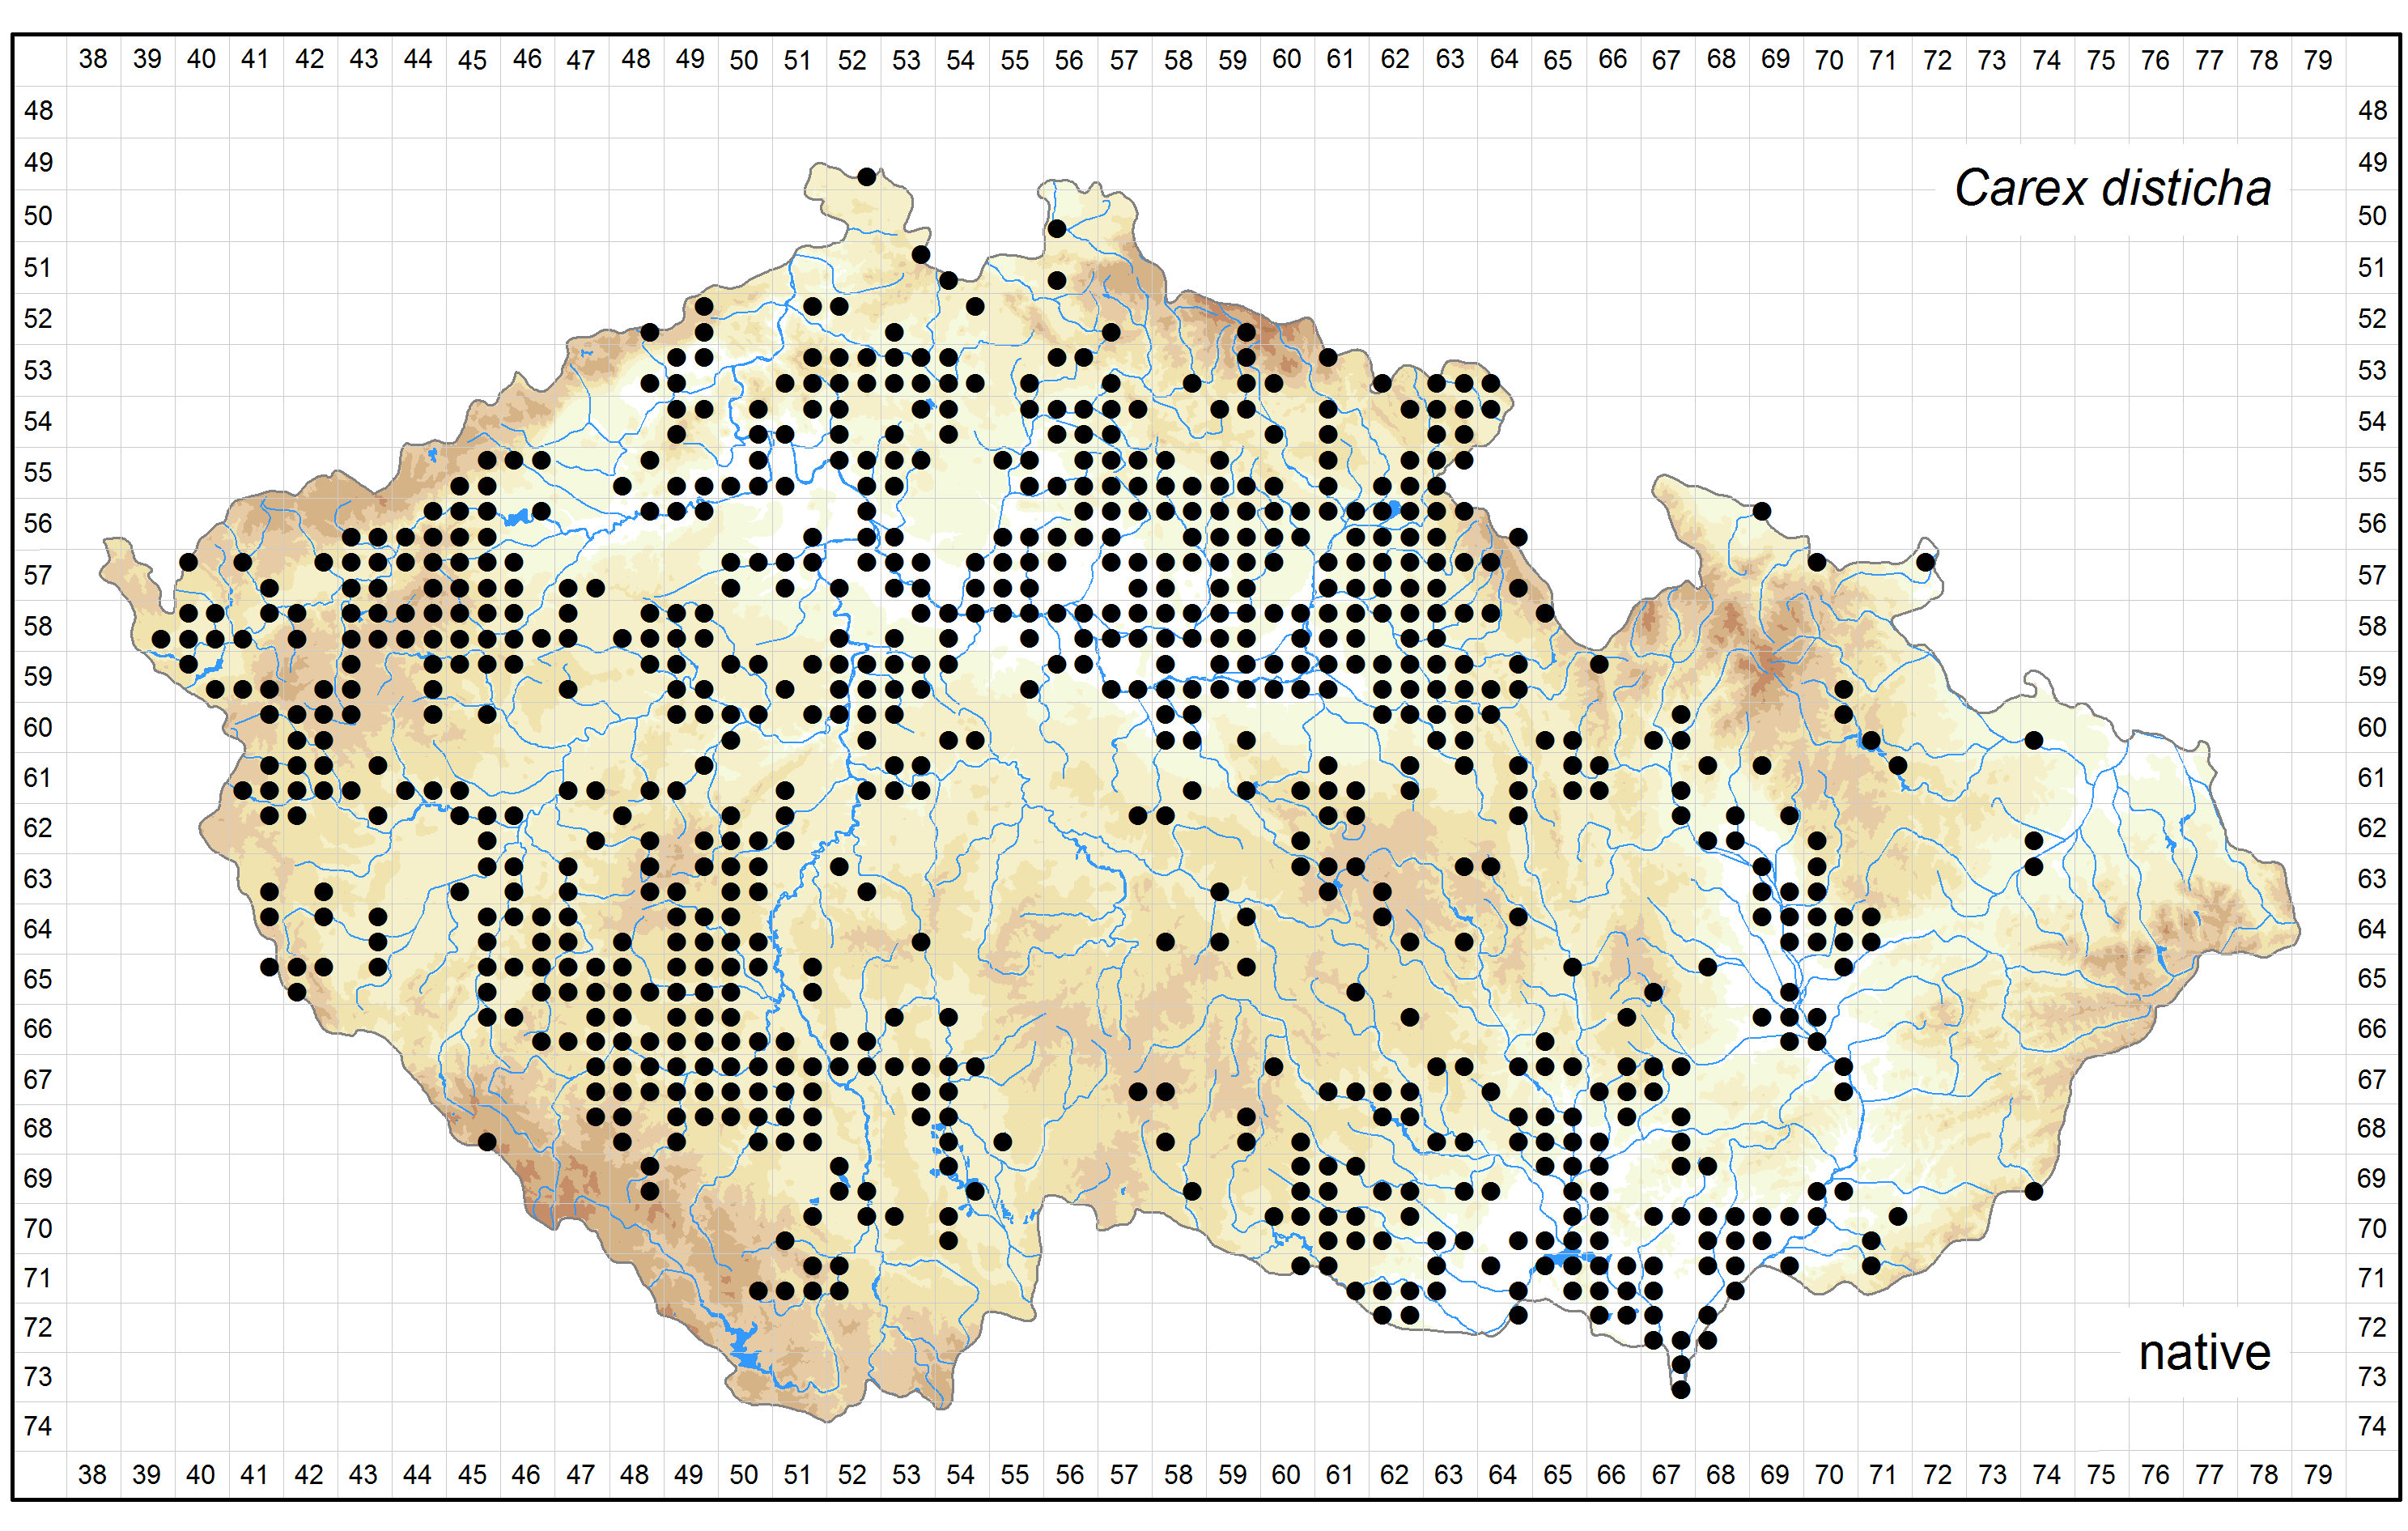 Distribution of Carex disticha in the Czech Republic Author of the map: Vít Grulich, Radomír Řepka Map produced on: 12-05-2016 Database records used for producing the distribution map of Carex